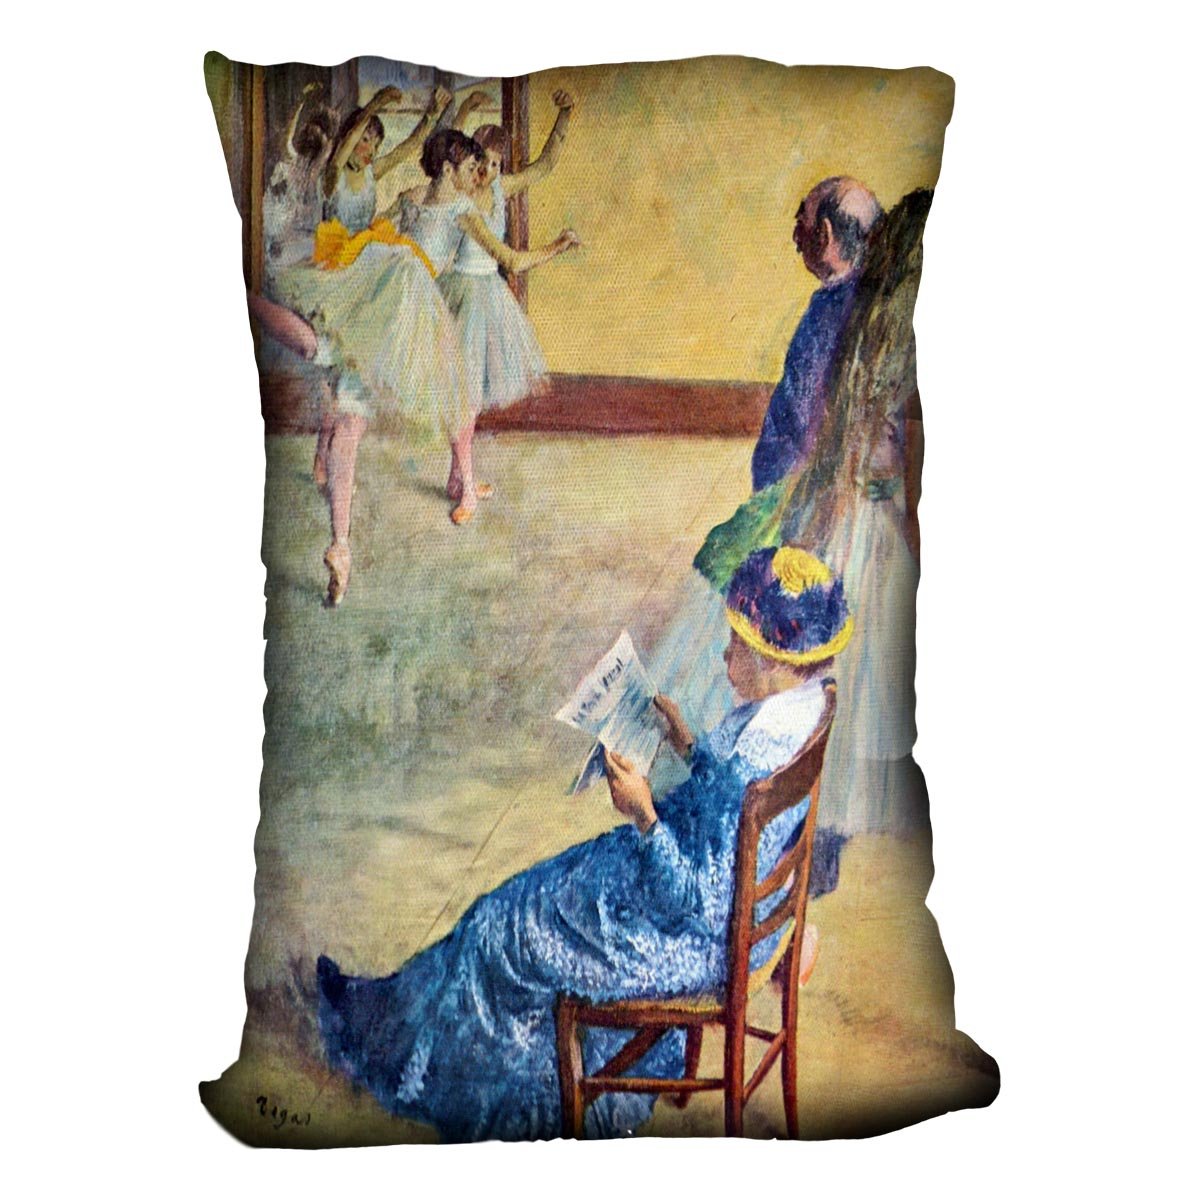 During the dance lessons Madame Cardinal by Degas Cushion